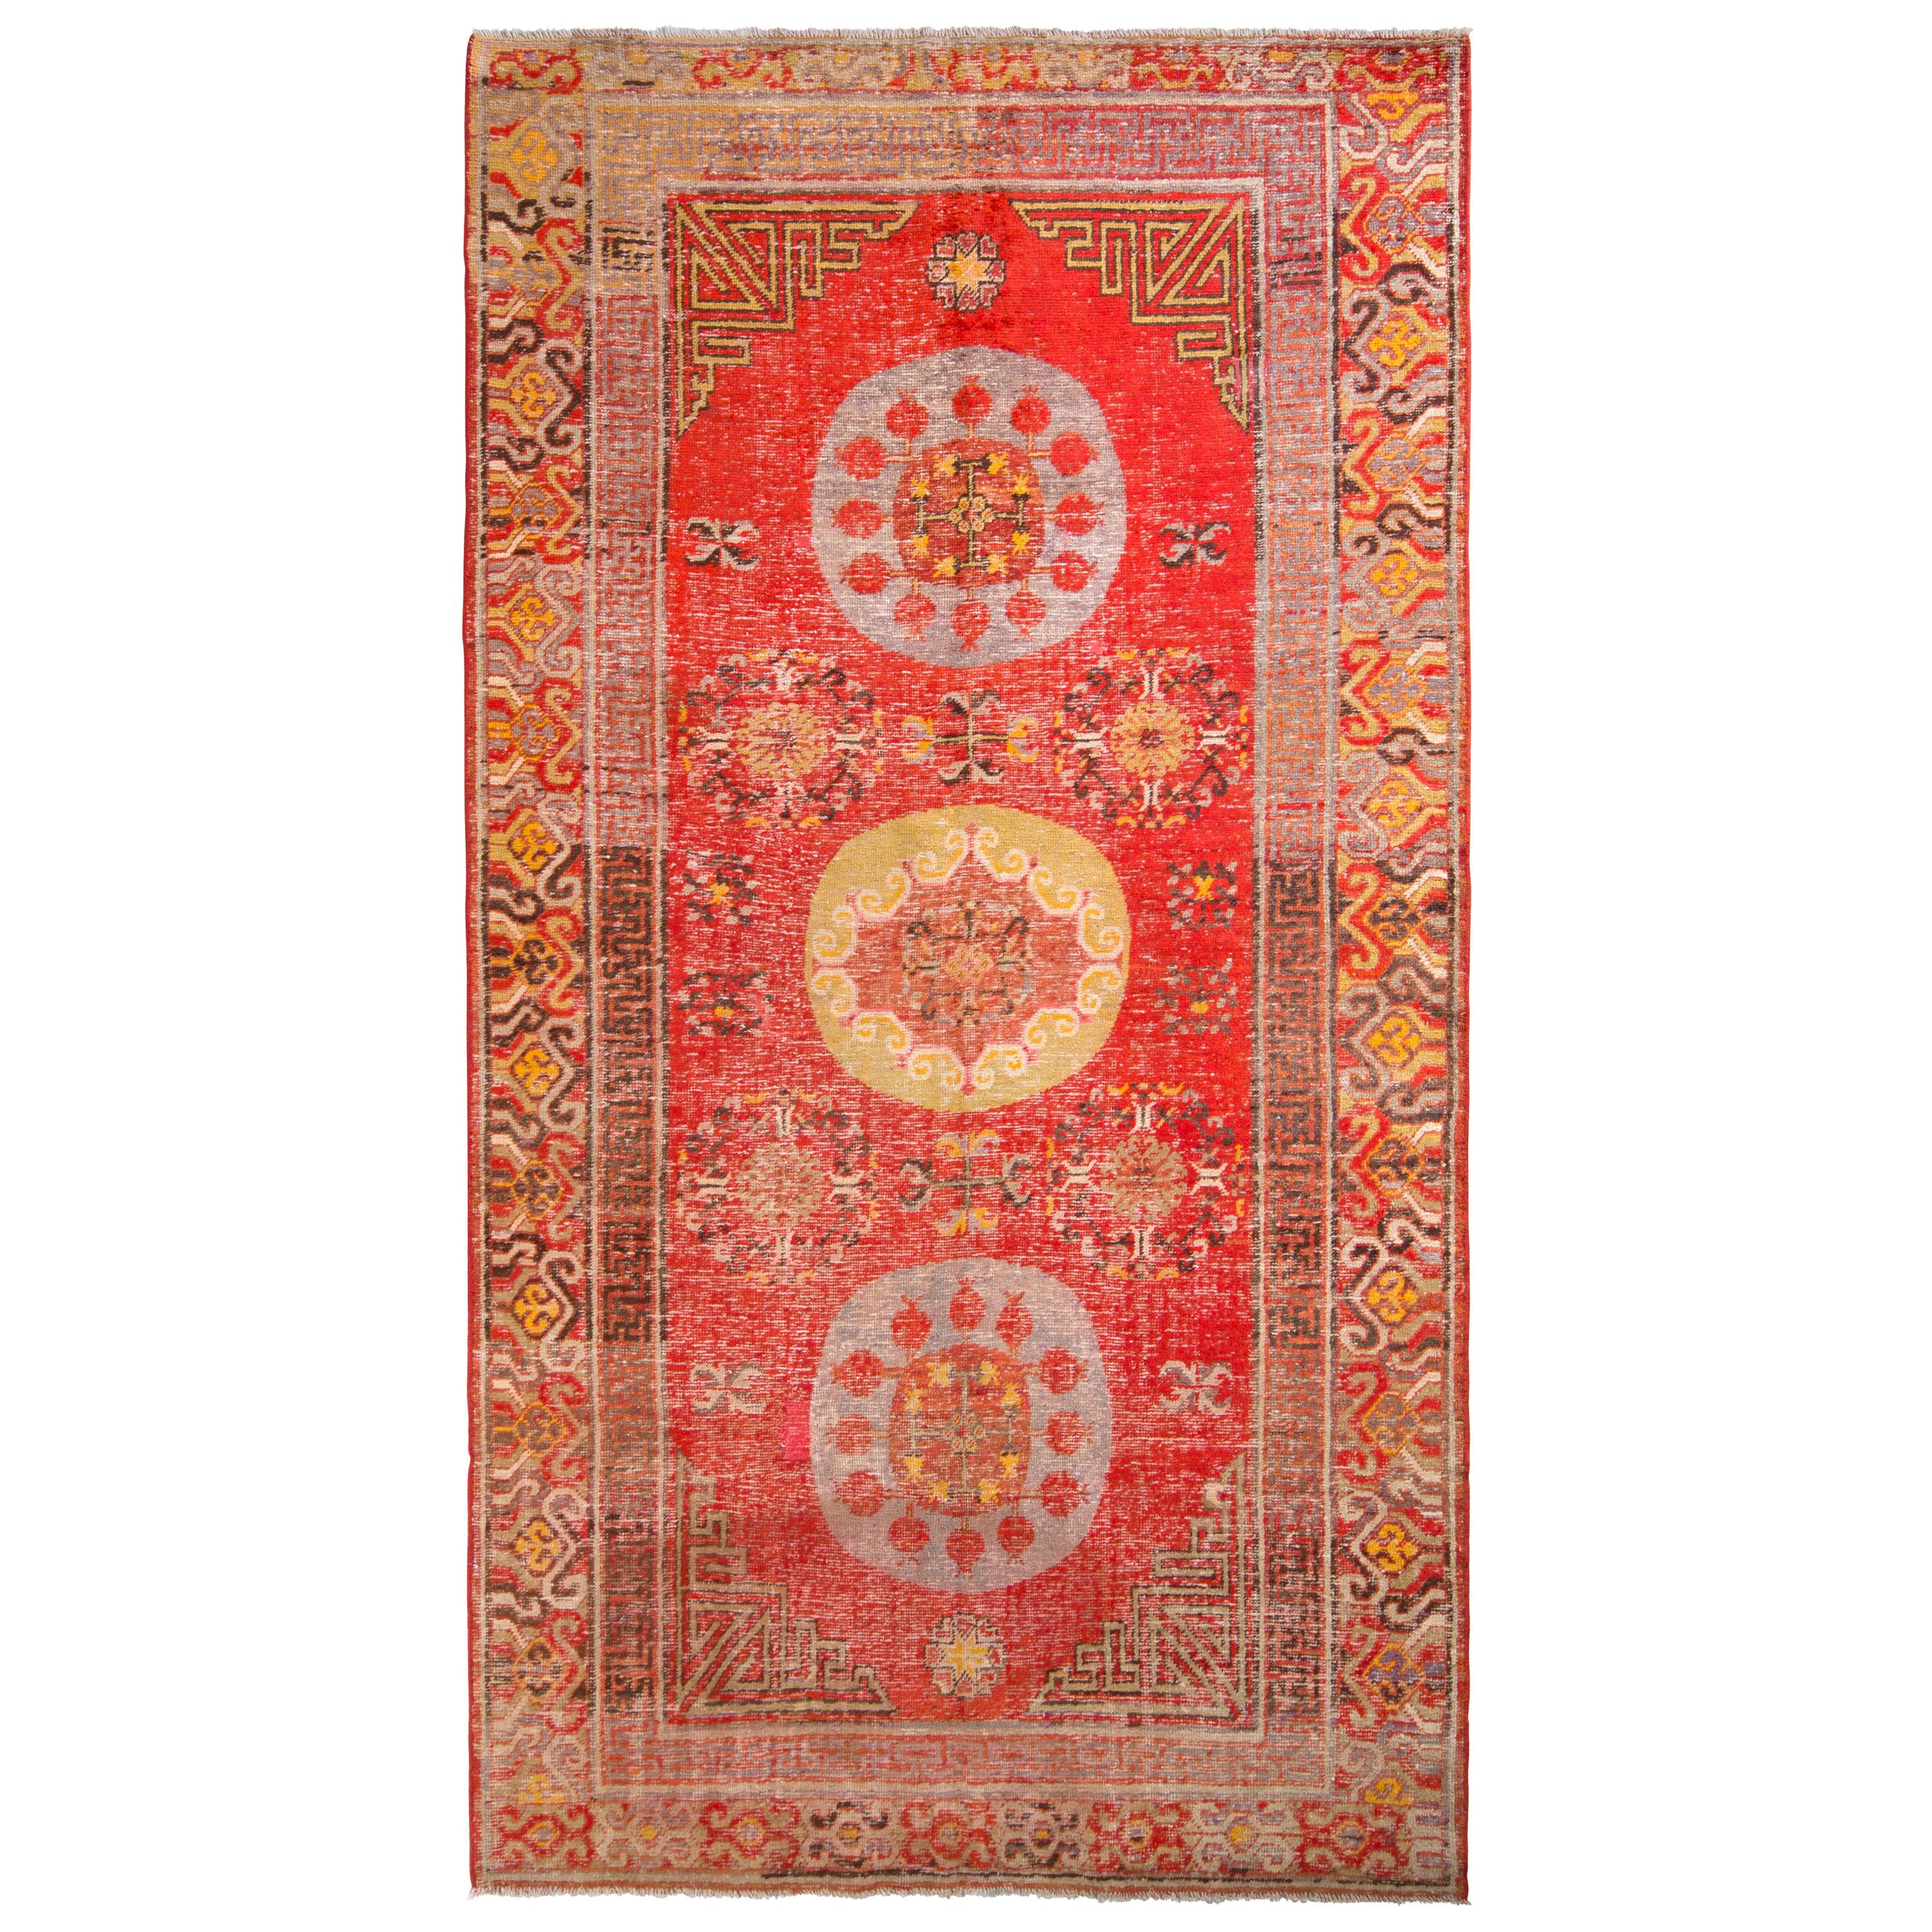 Hand-Knotted Antique Khotan Rug in Red and Gold with Medallion Patterns